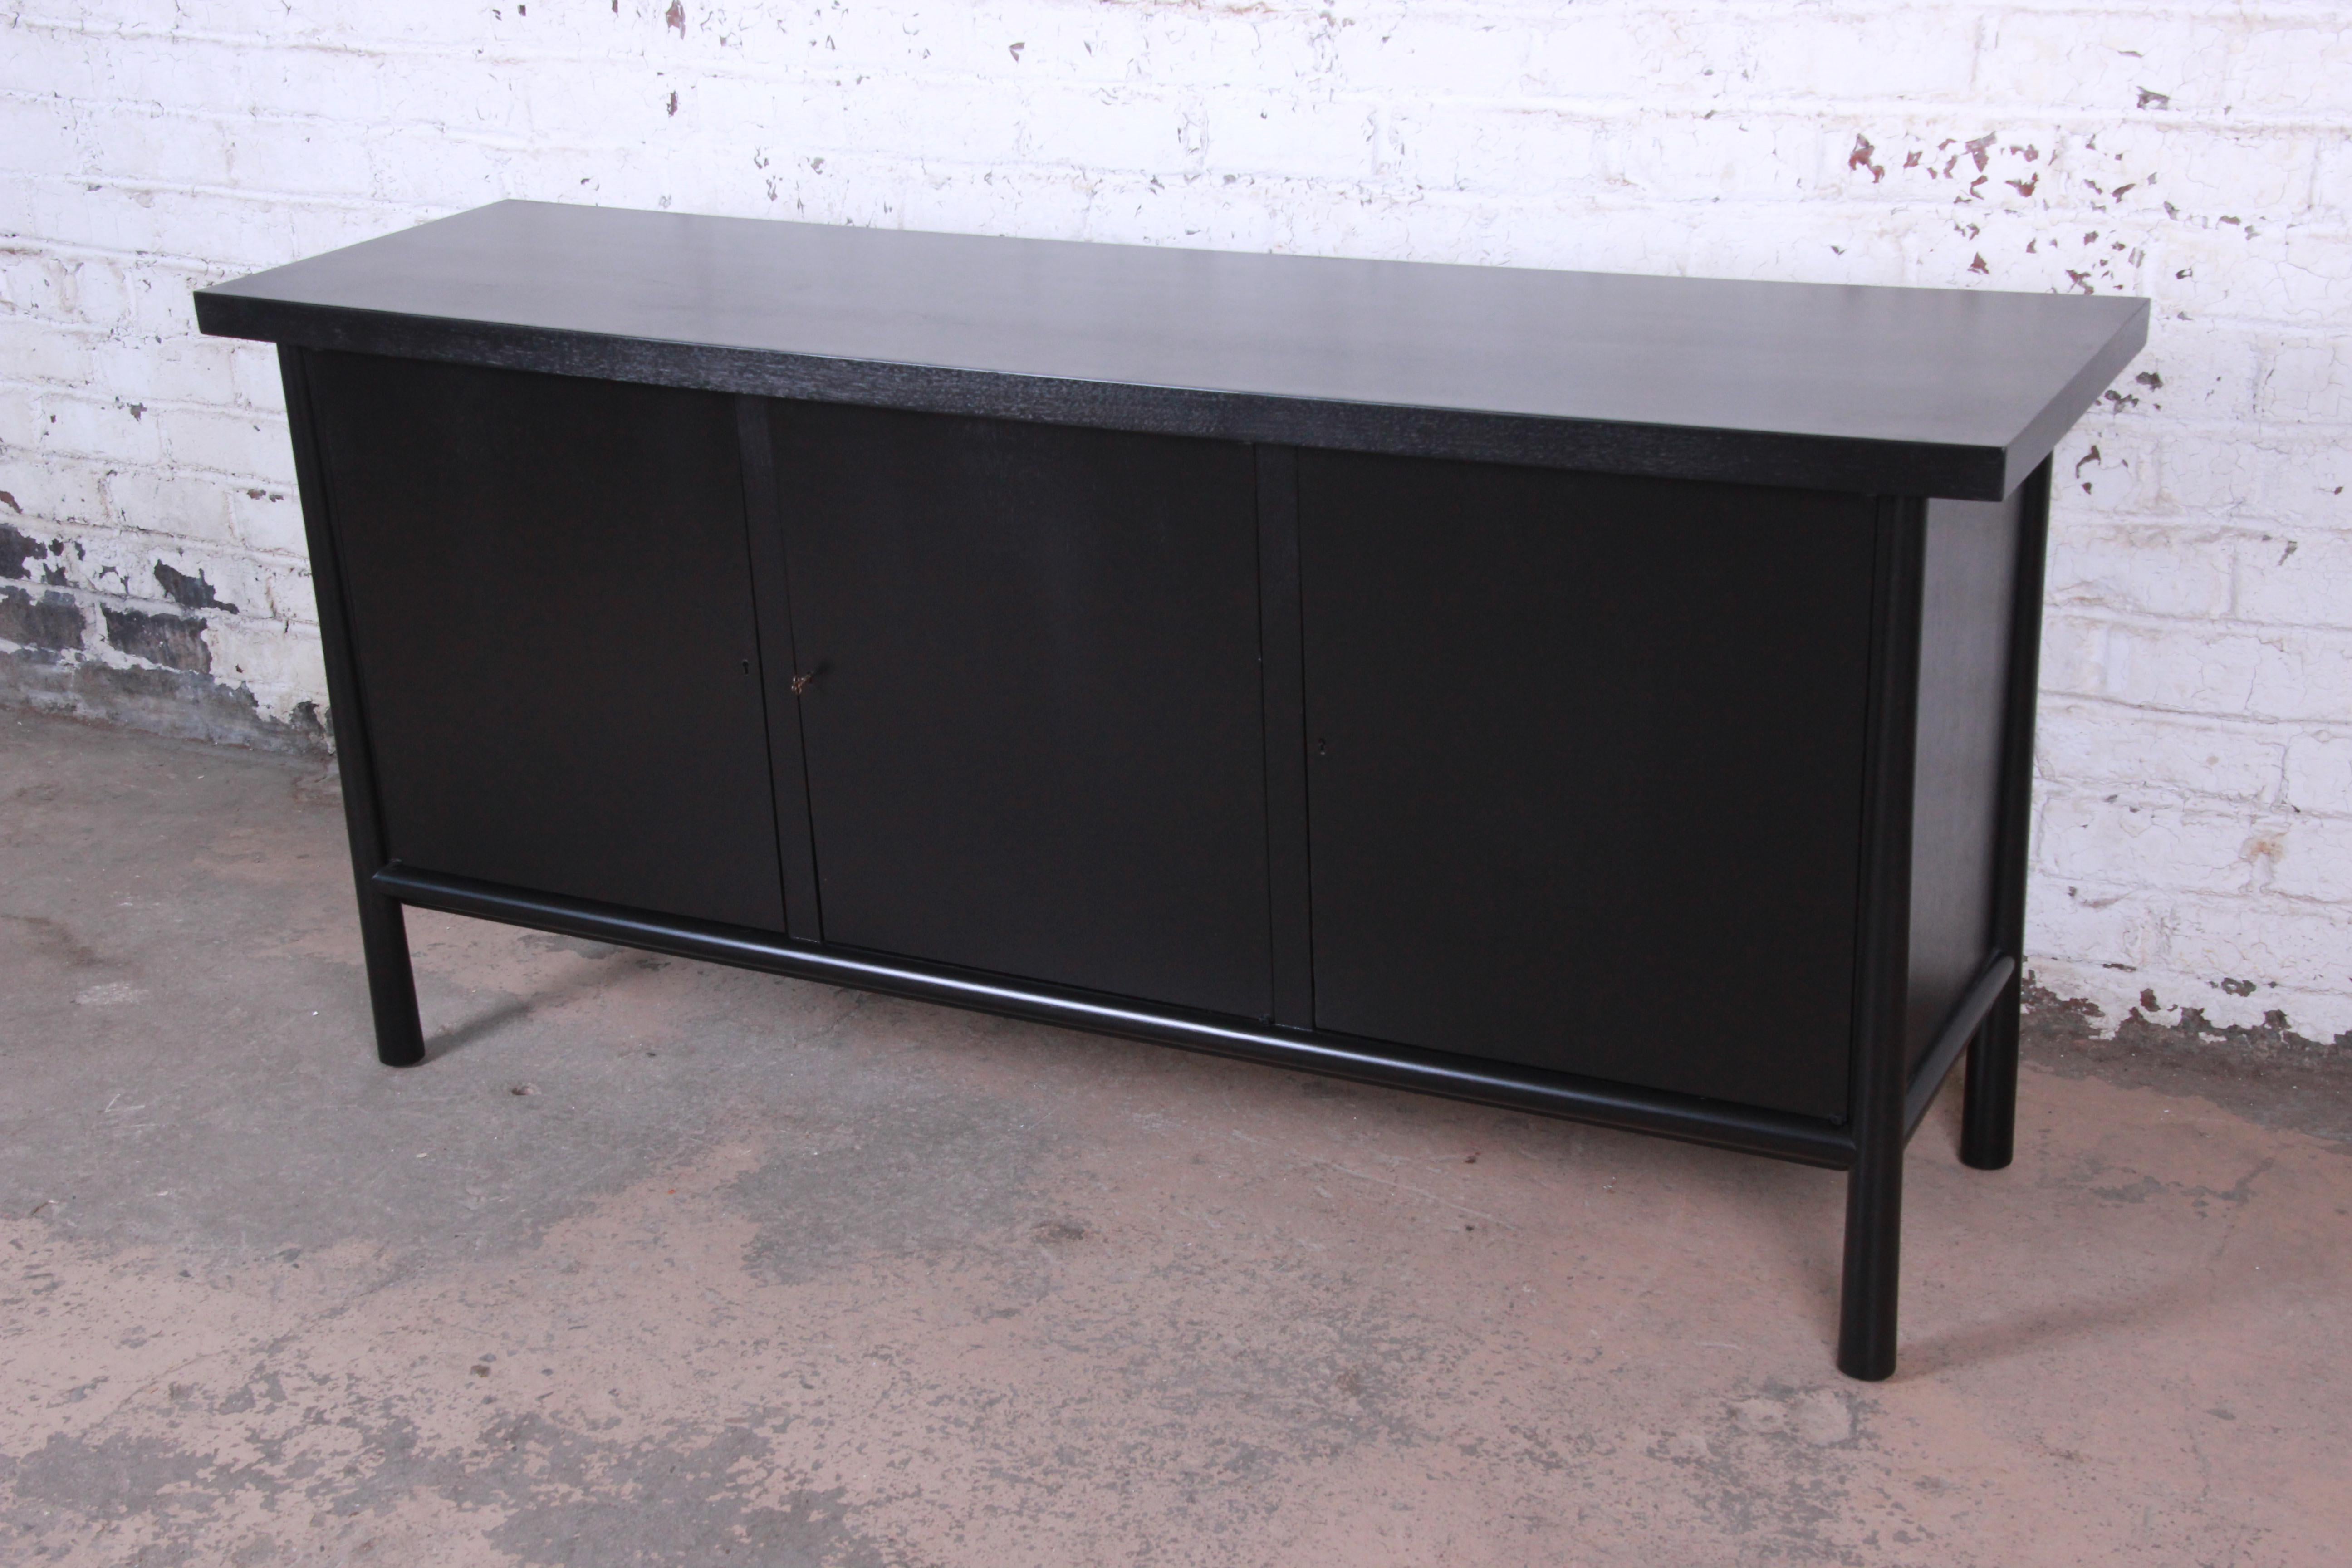 An exceptional newly ebonized Hollywood Regency chinoiserie 